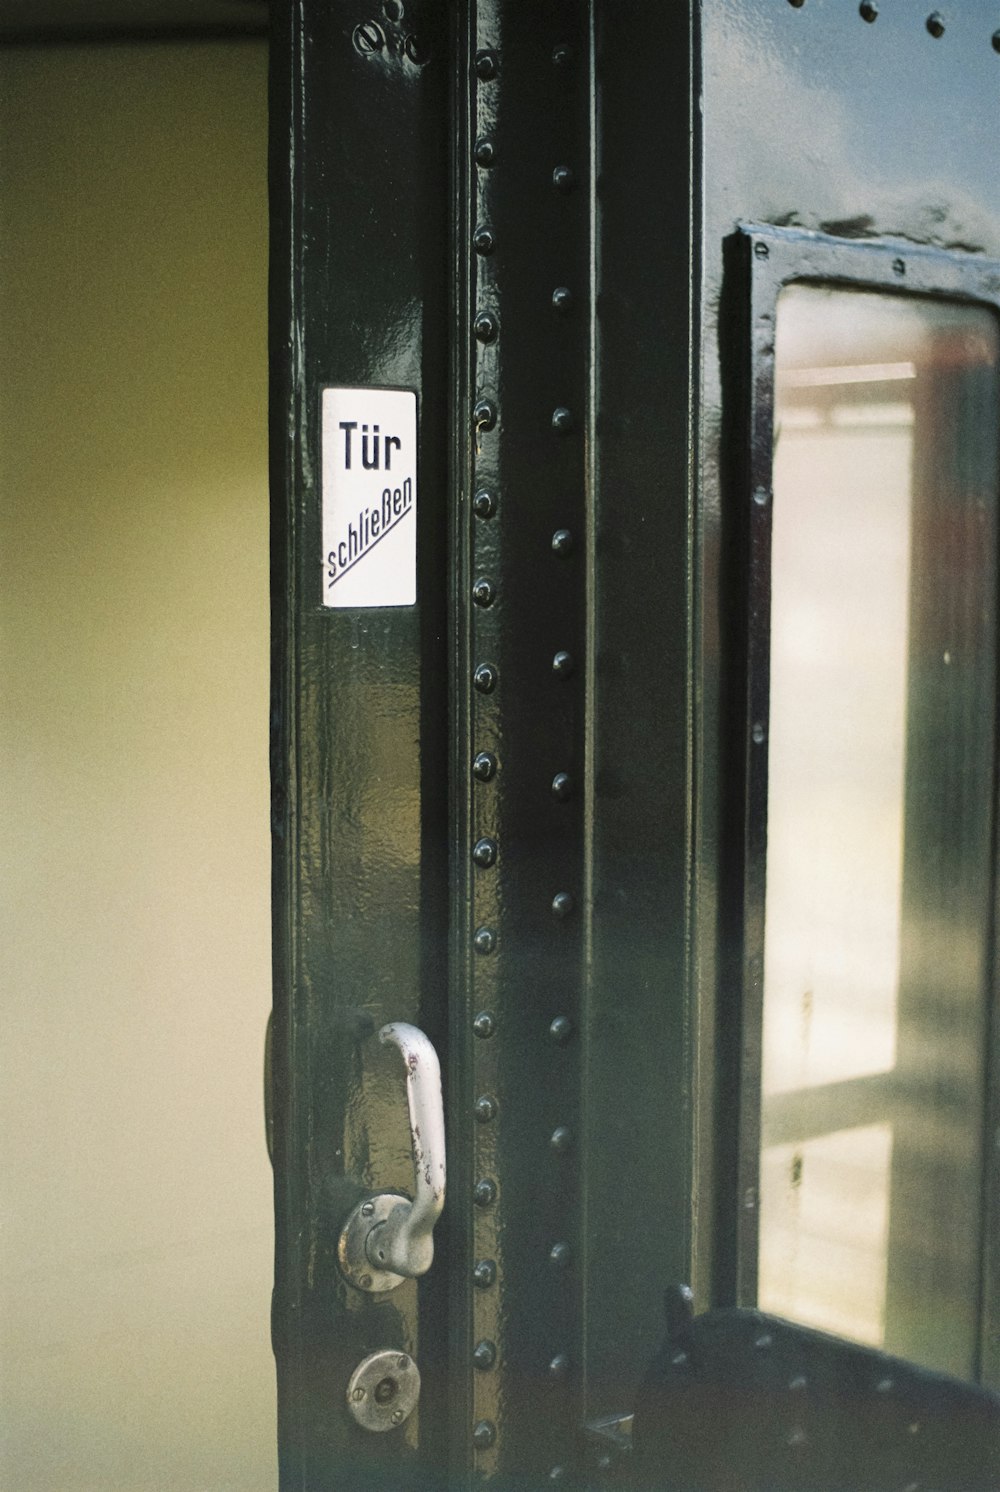 a close up of a door with a sign on it